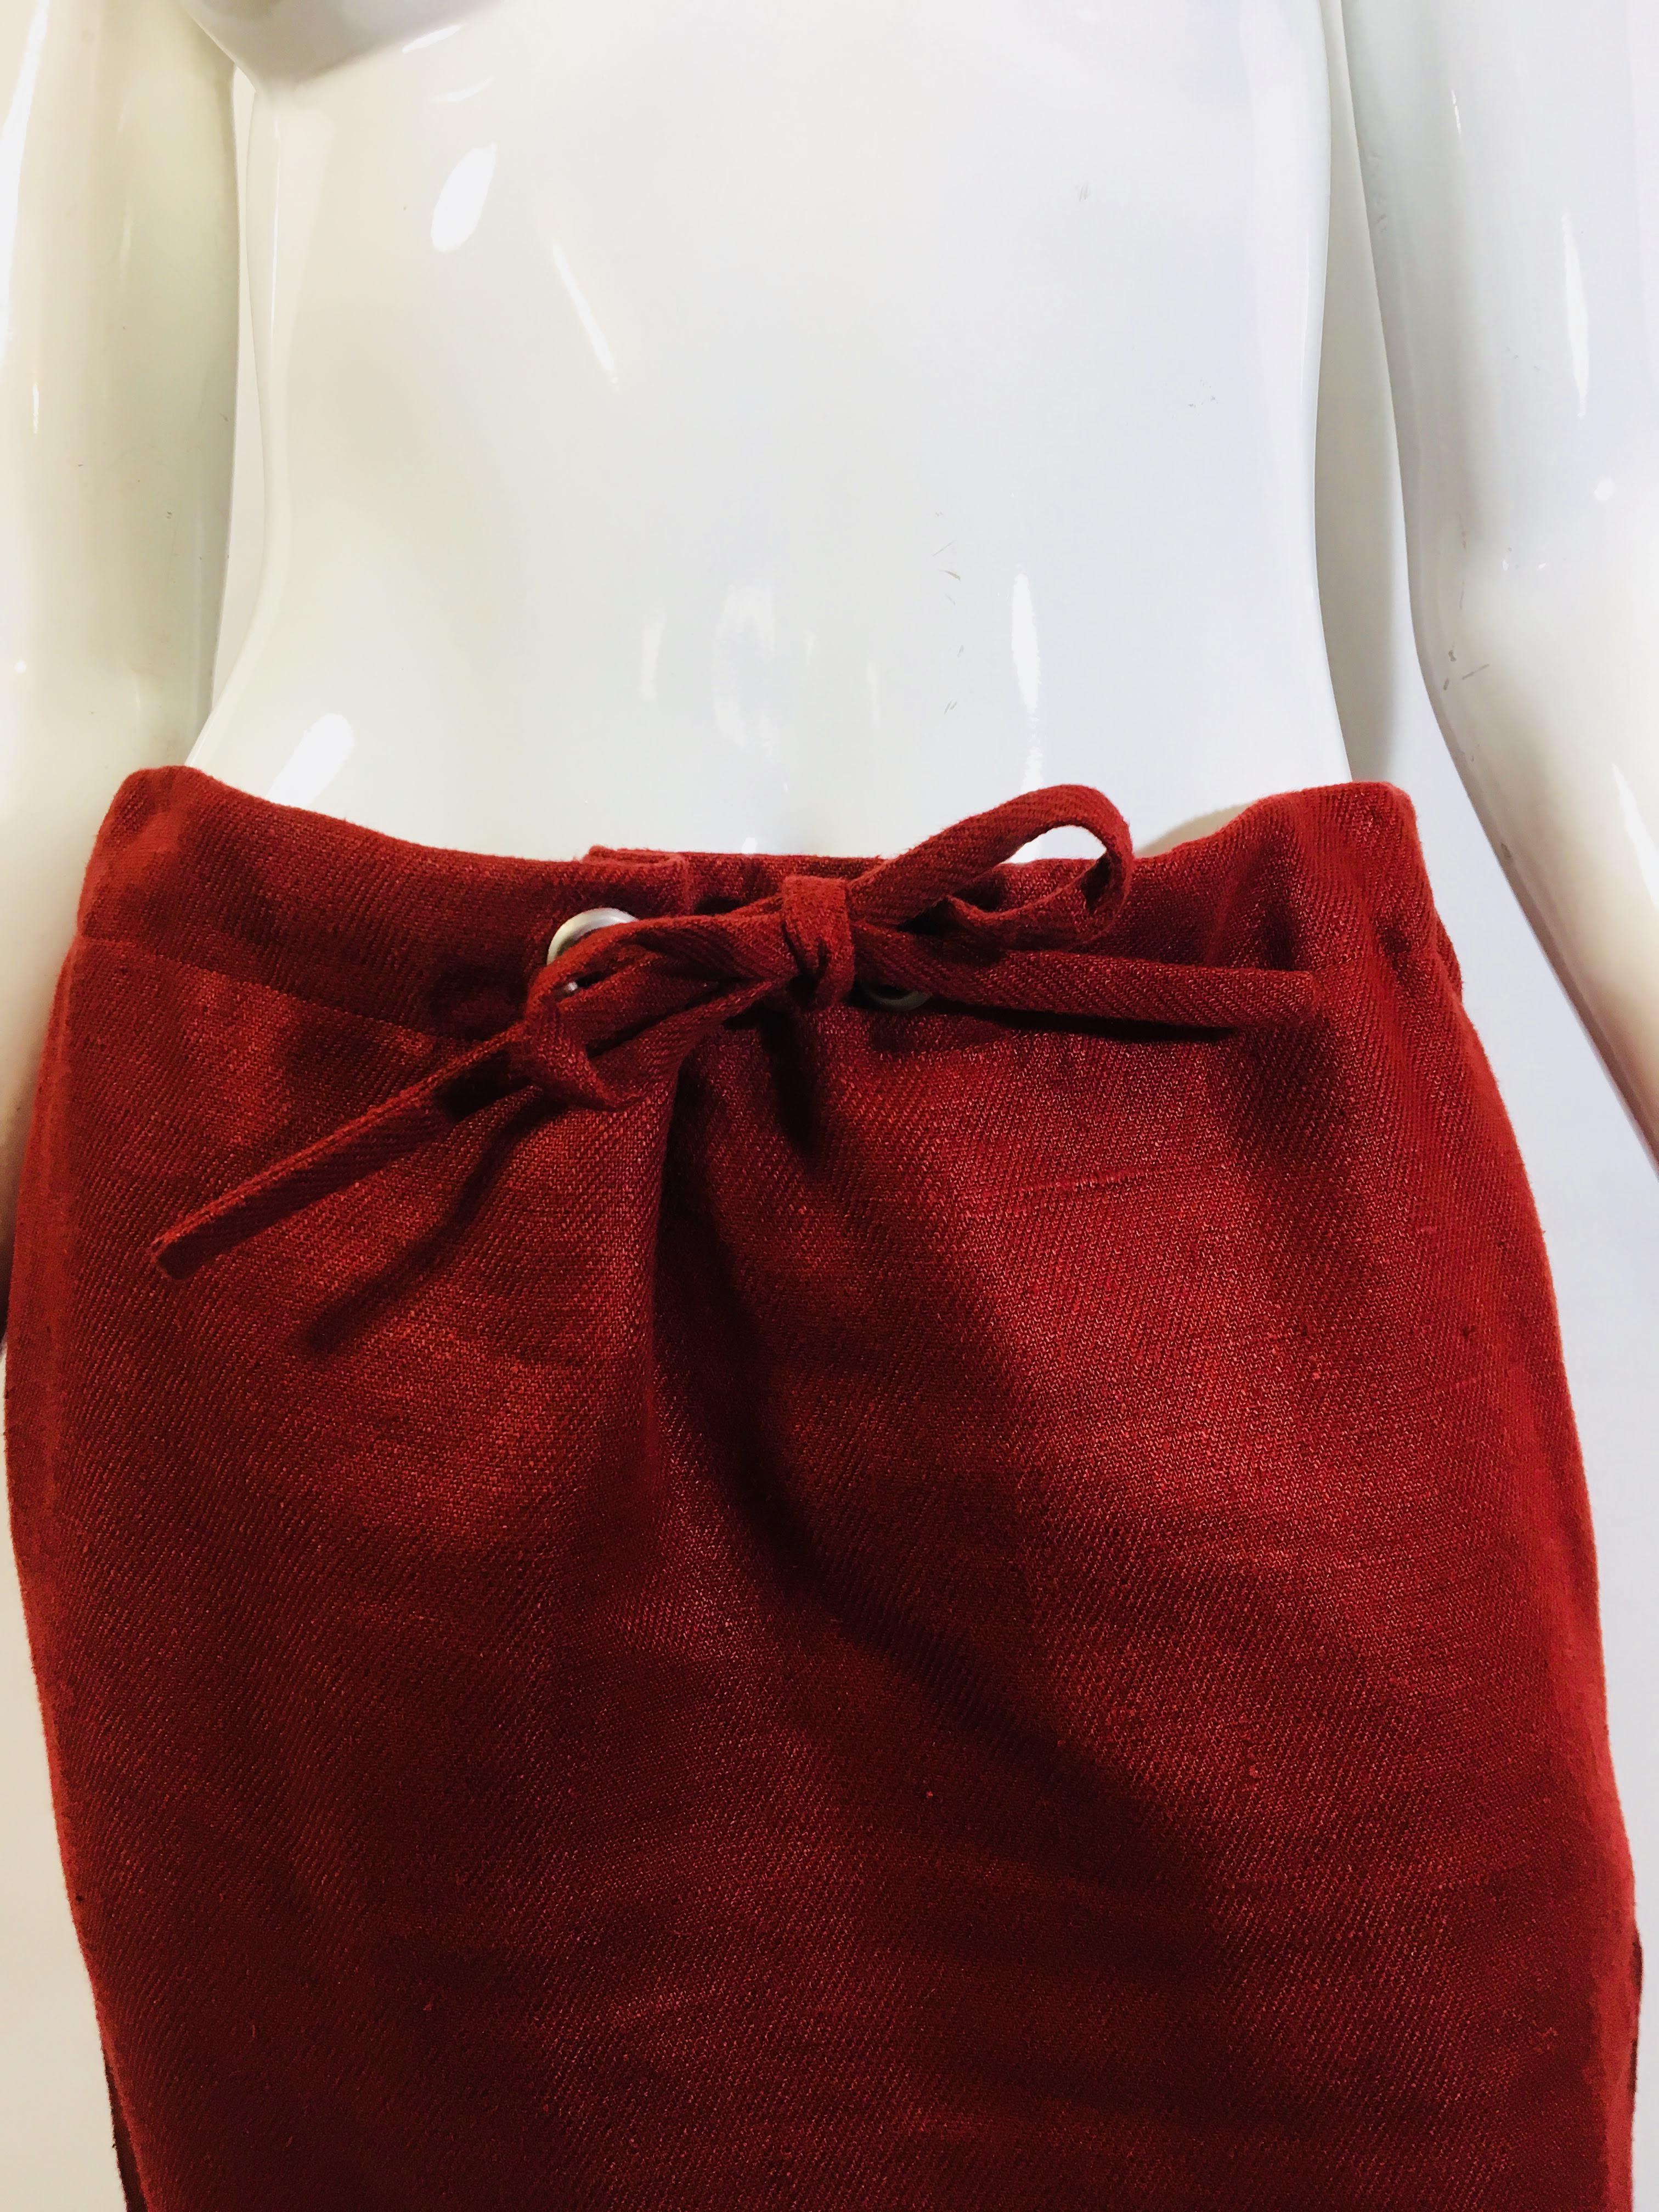 Hermes Paris Red Linen Pencil Skirt with Drawstring Detail
Size 38